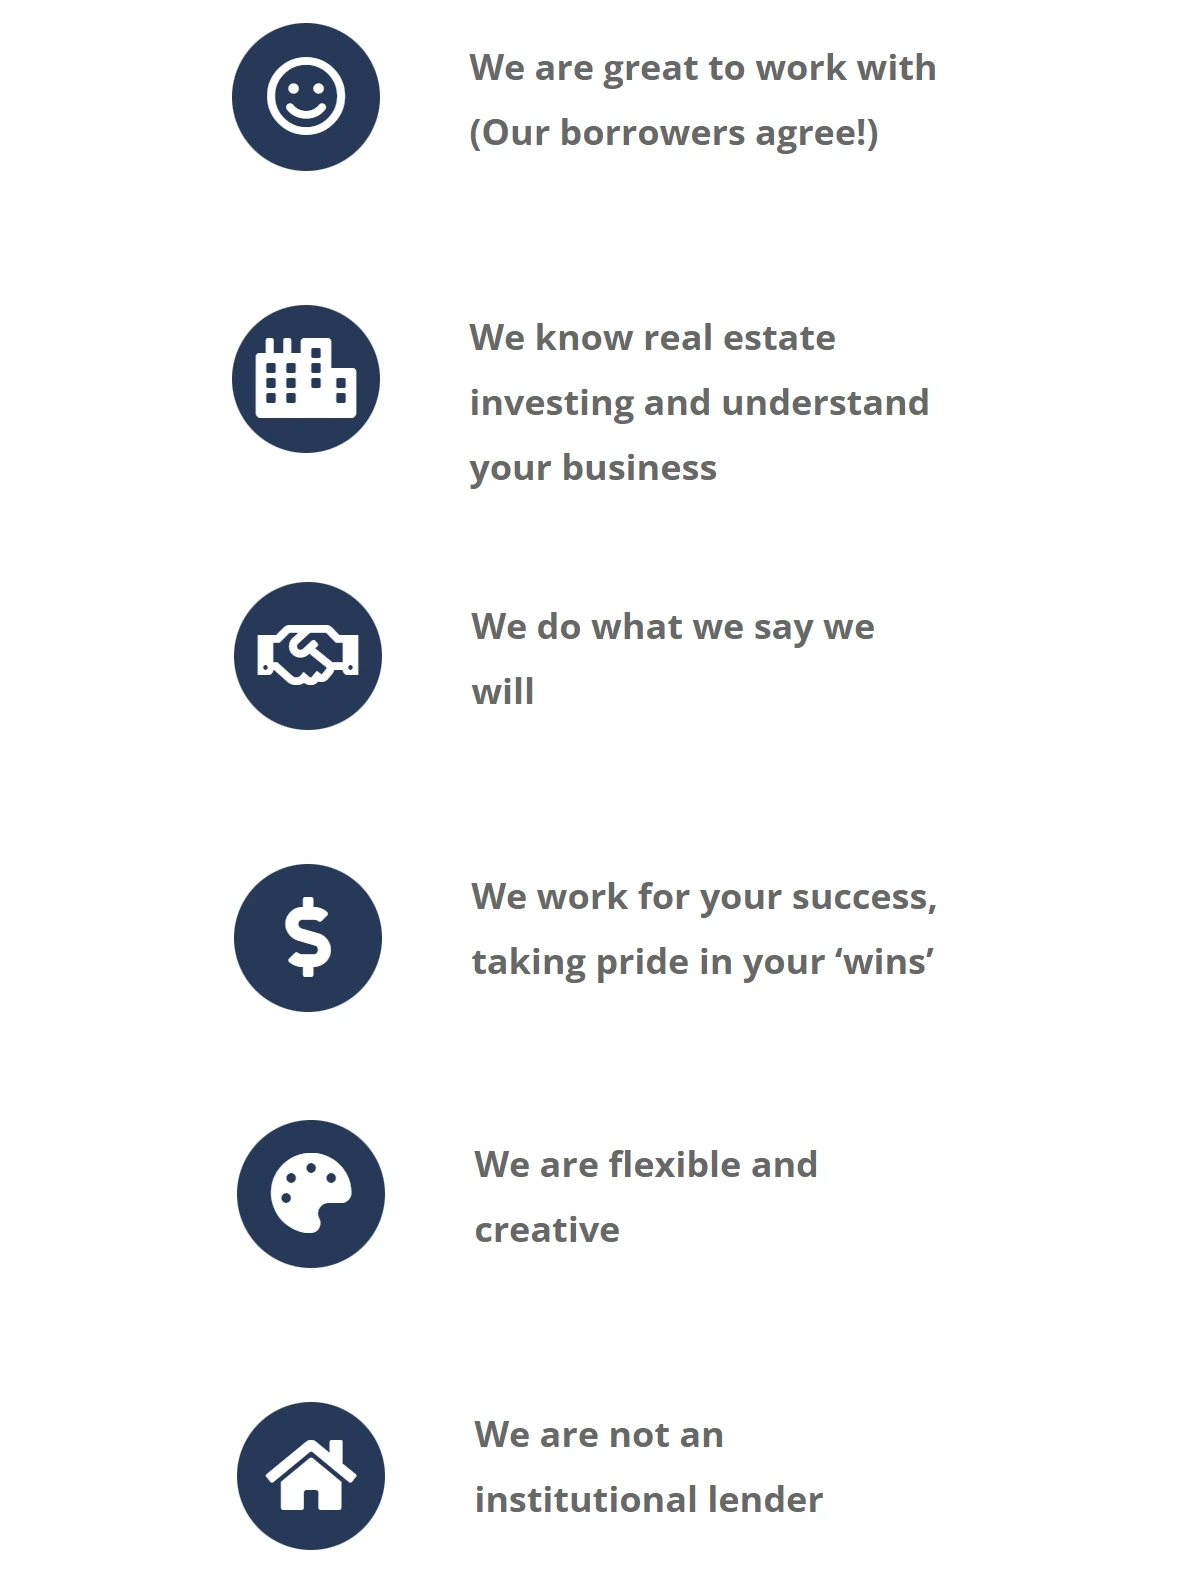 Why Partner with Us infographic